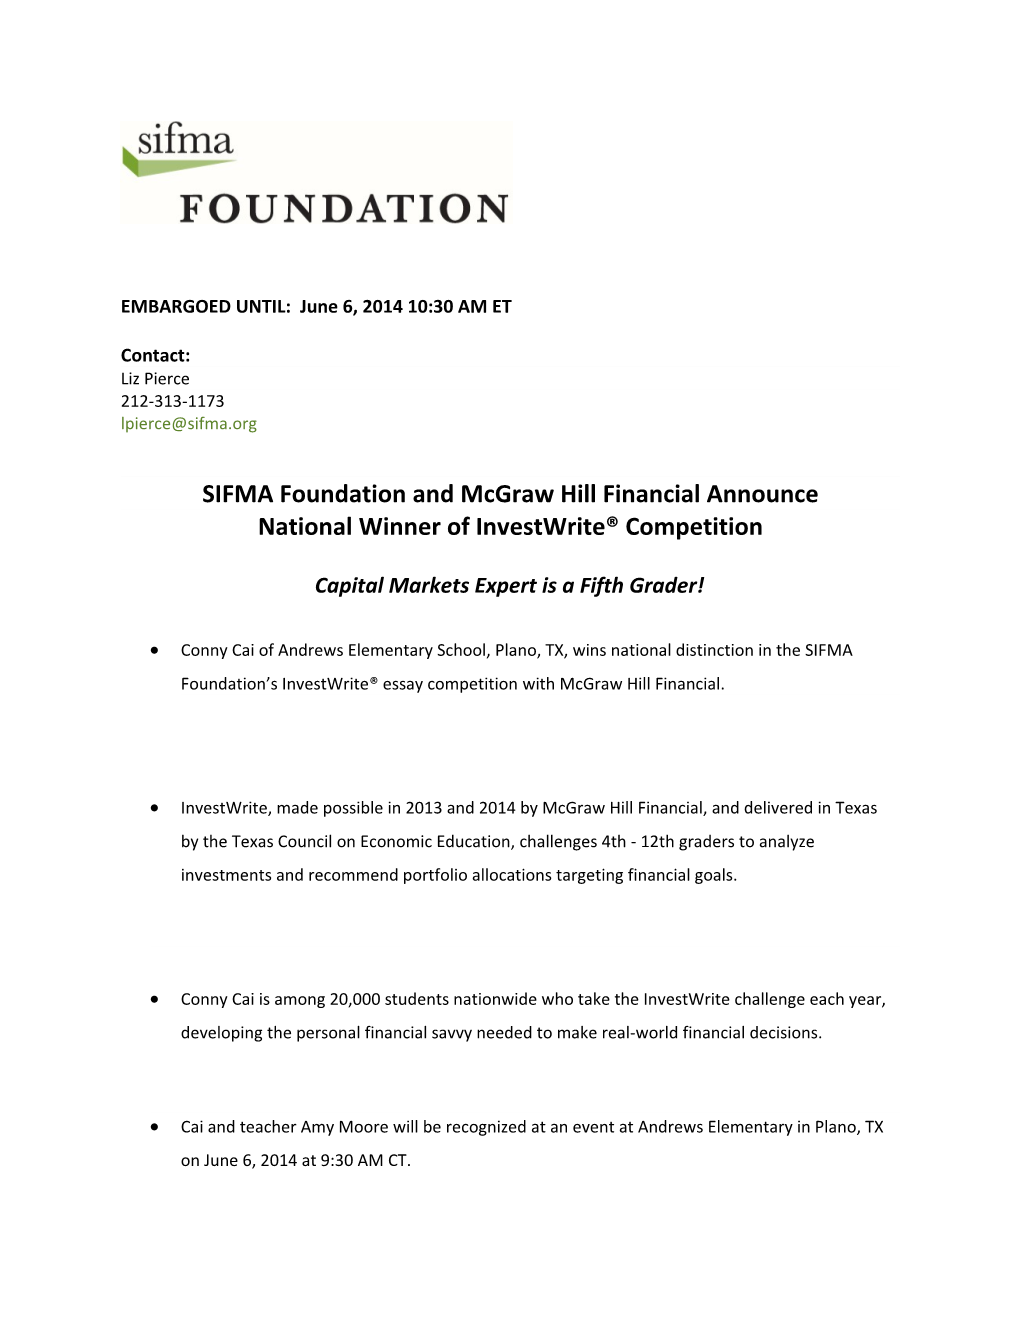 SIFMA Foundation and Mcgraw Hill Financial Announce